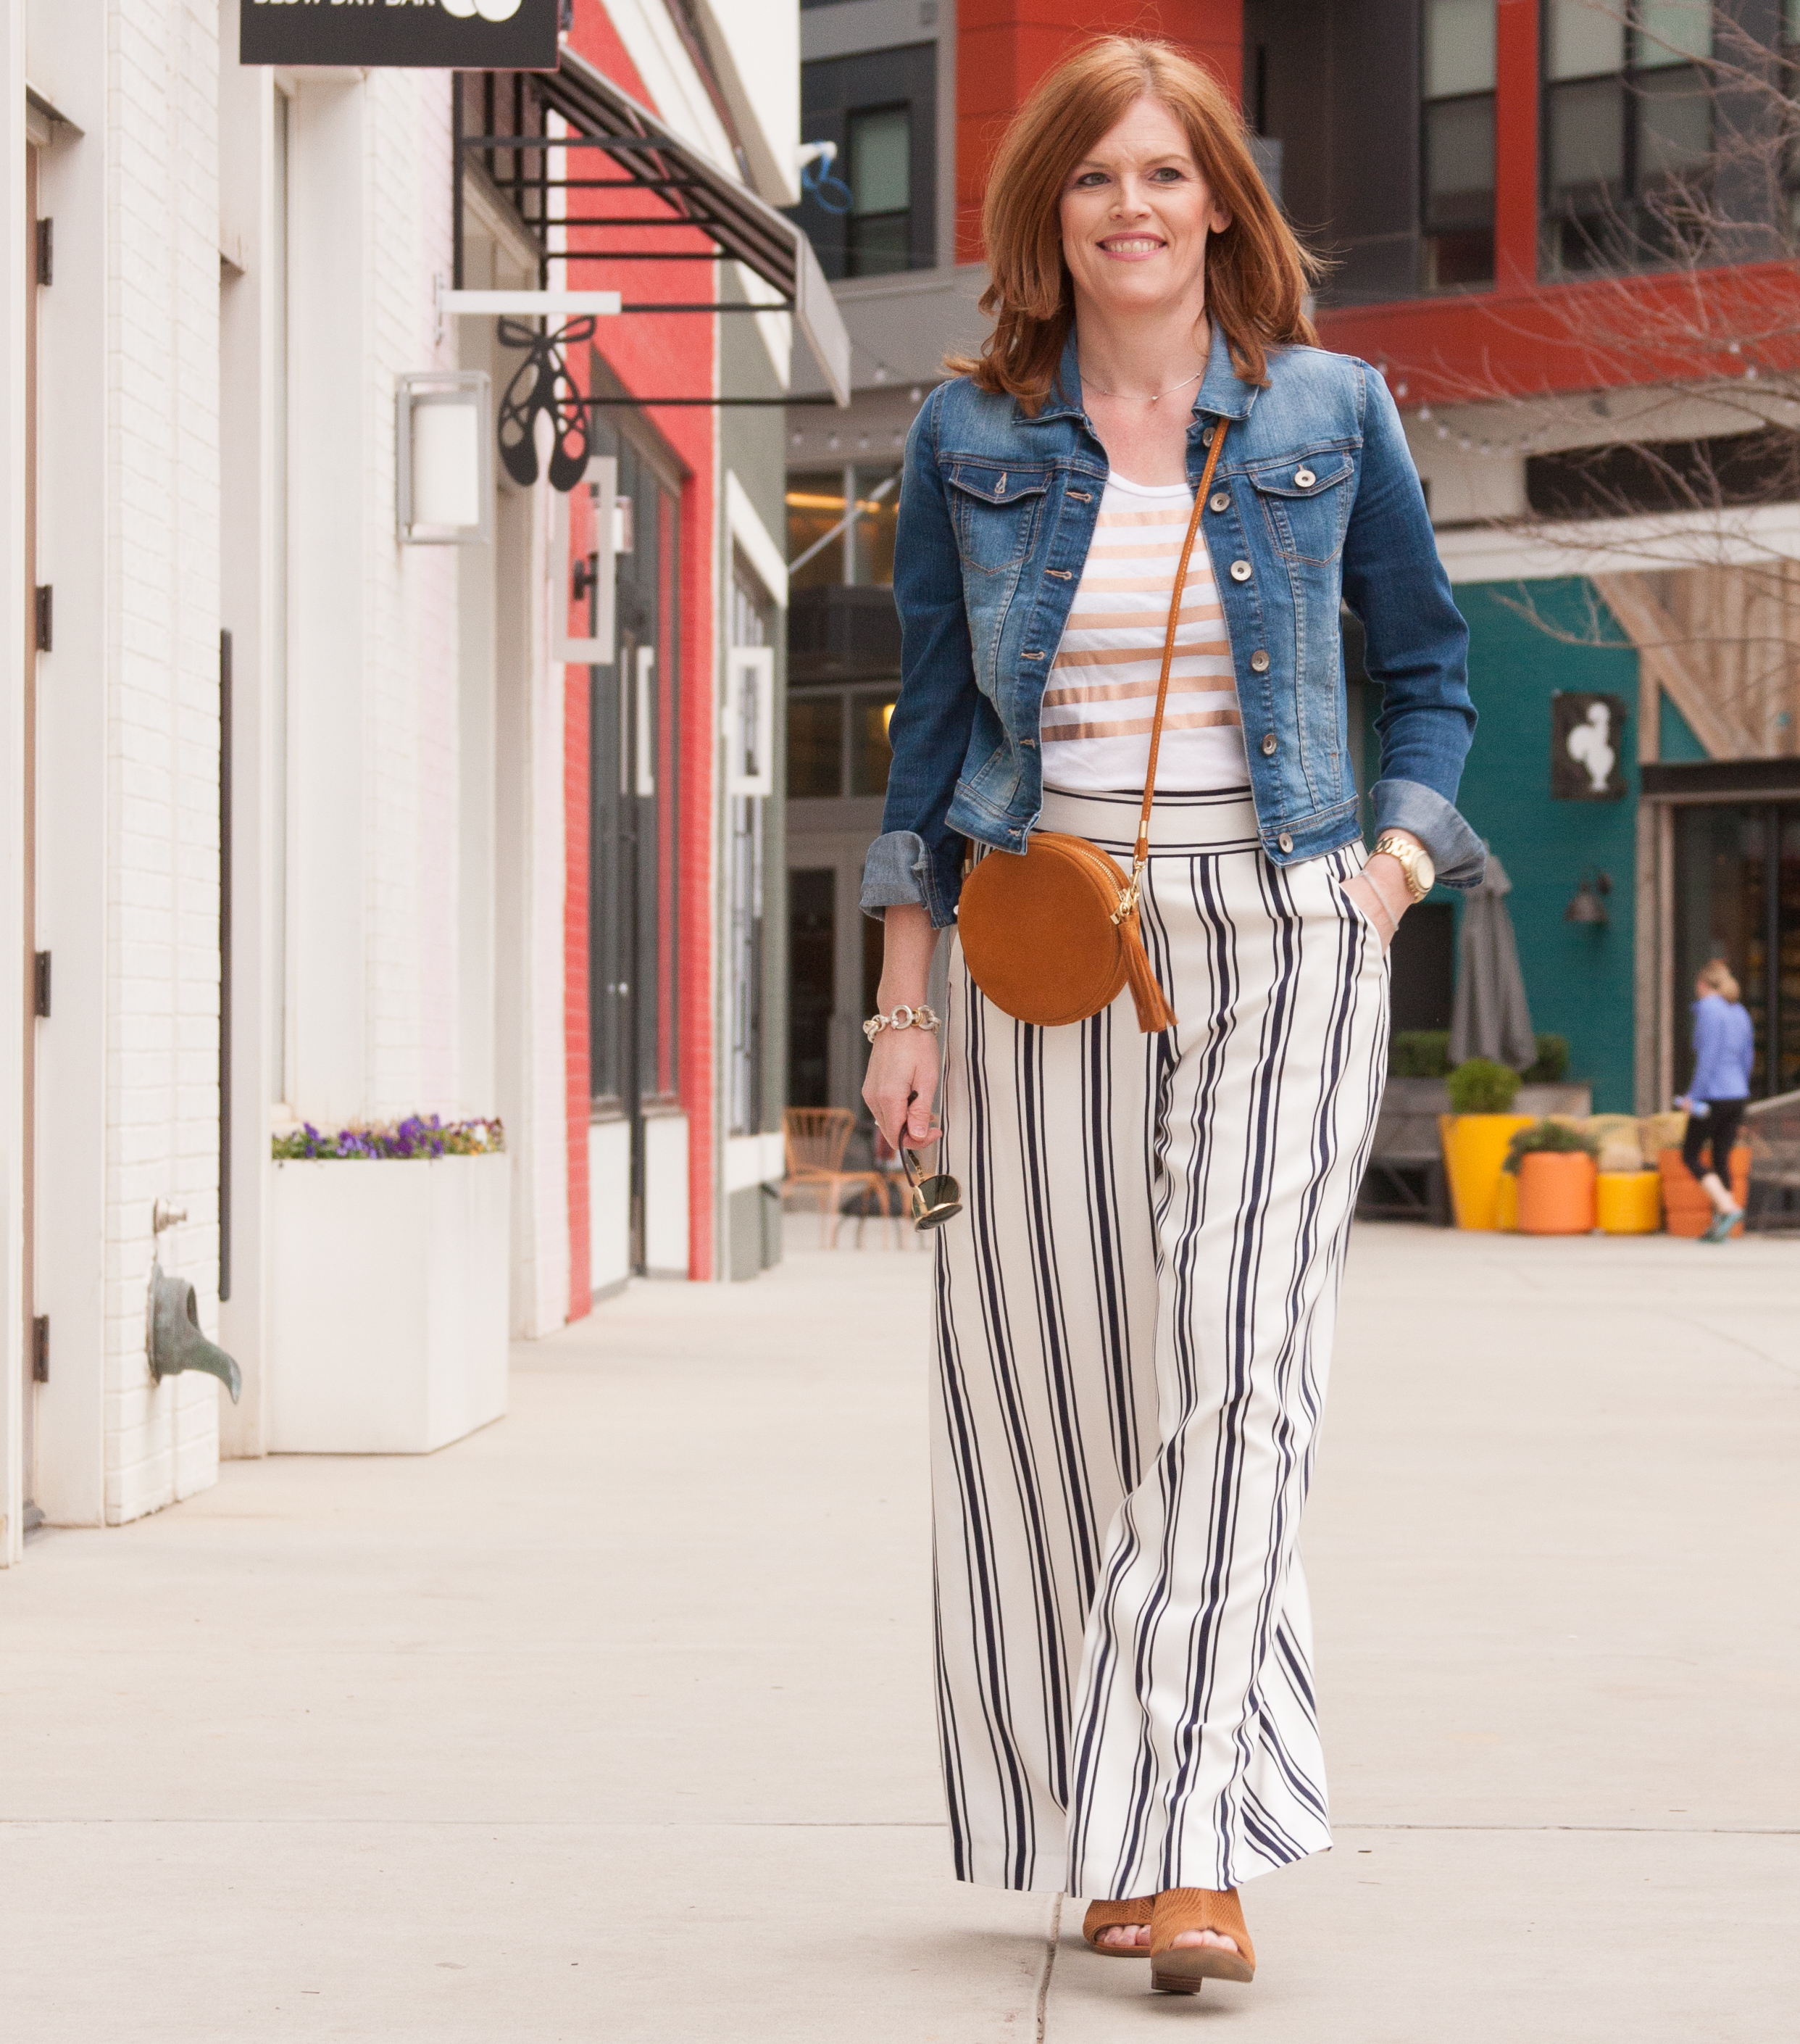 Spring Striped Chic Outfit